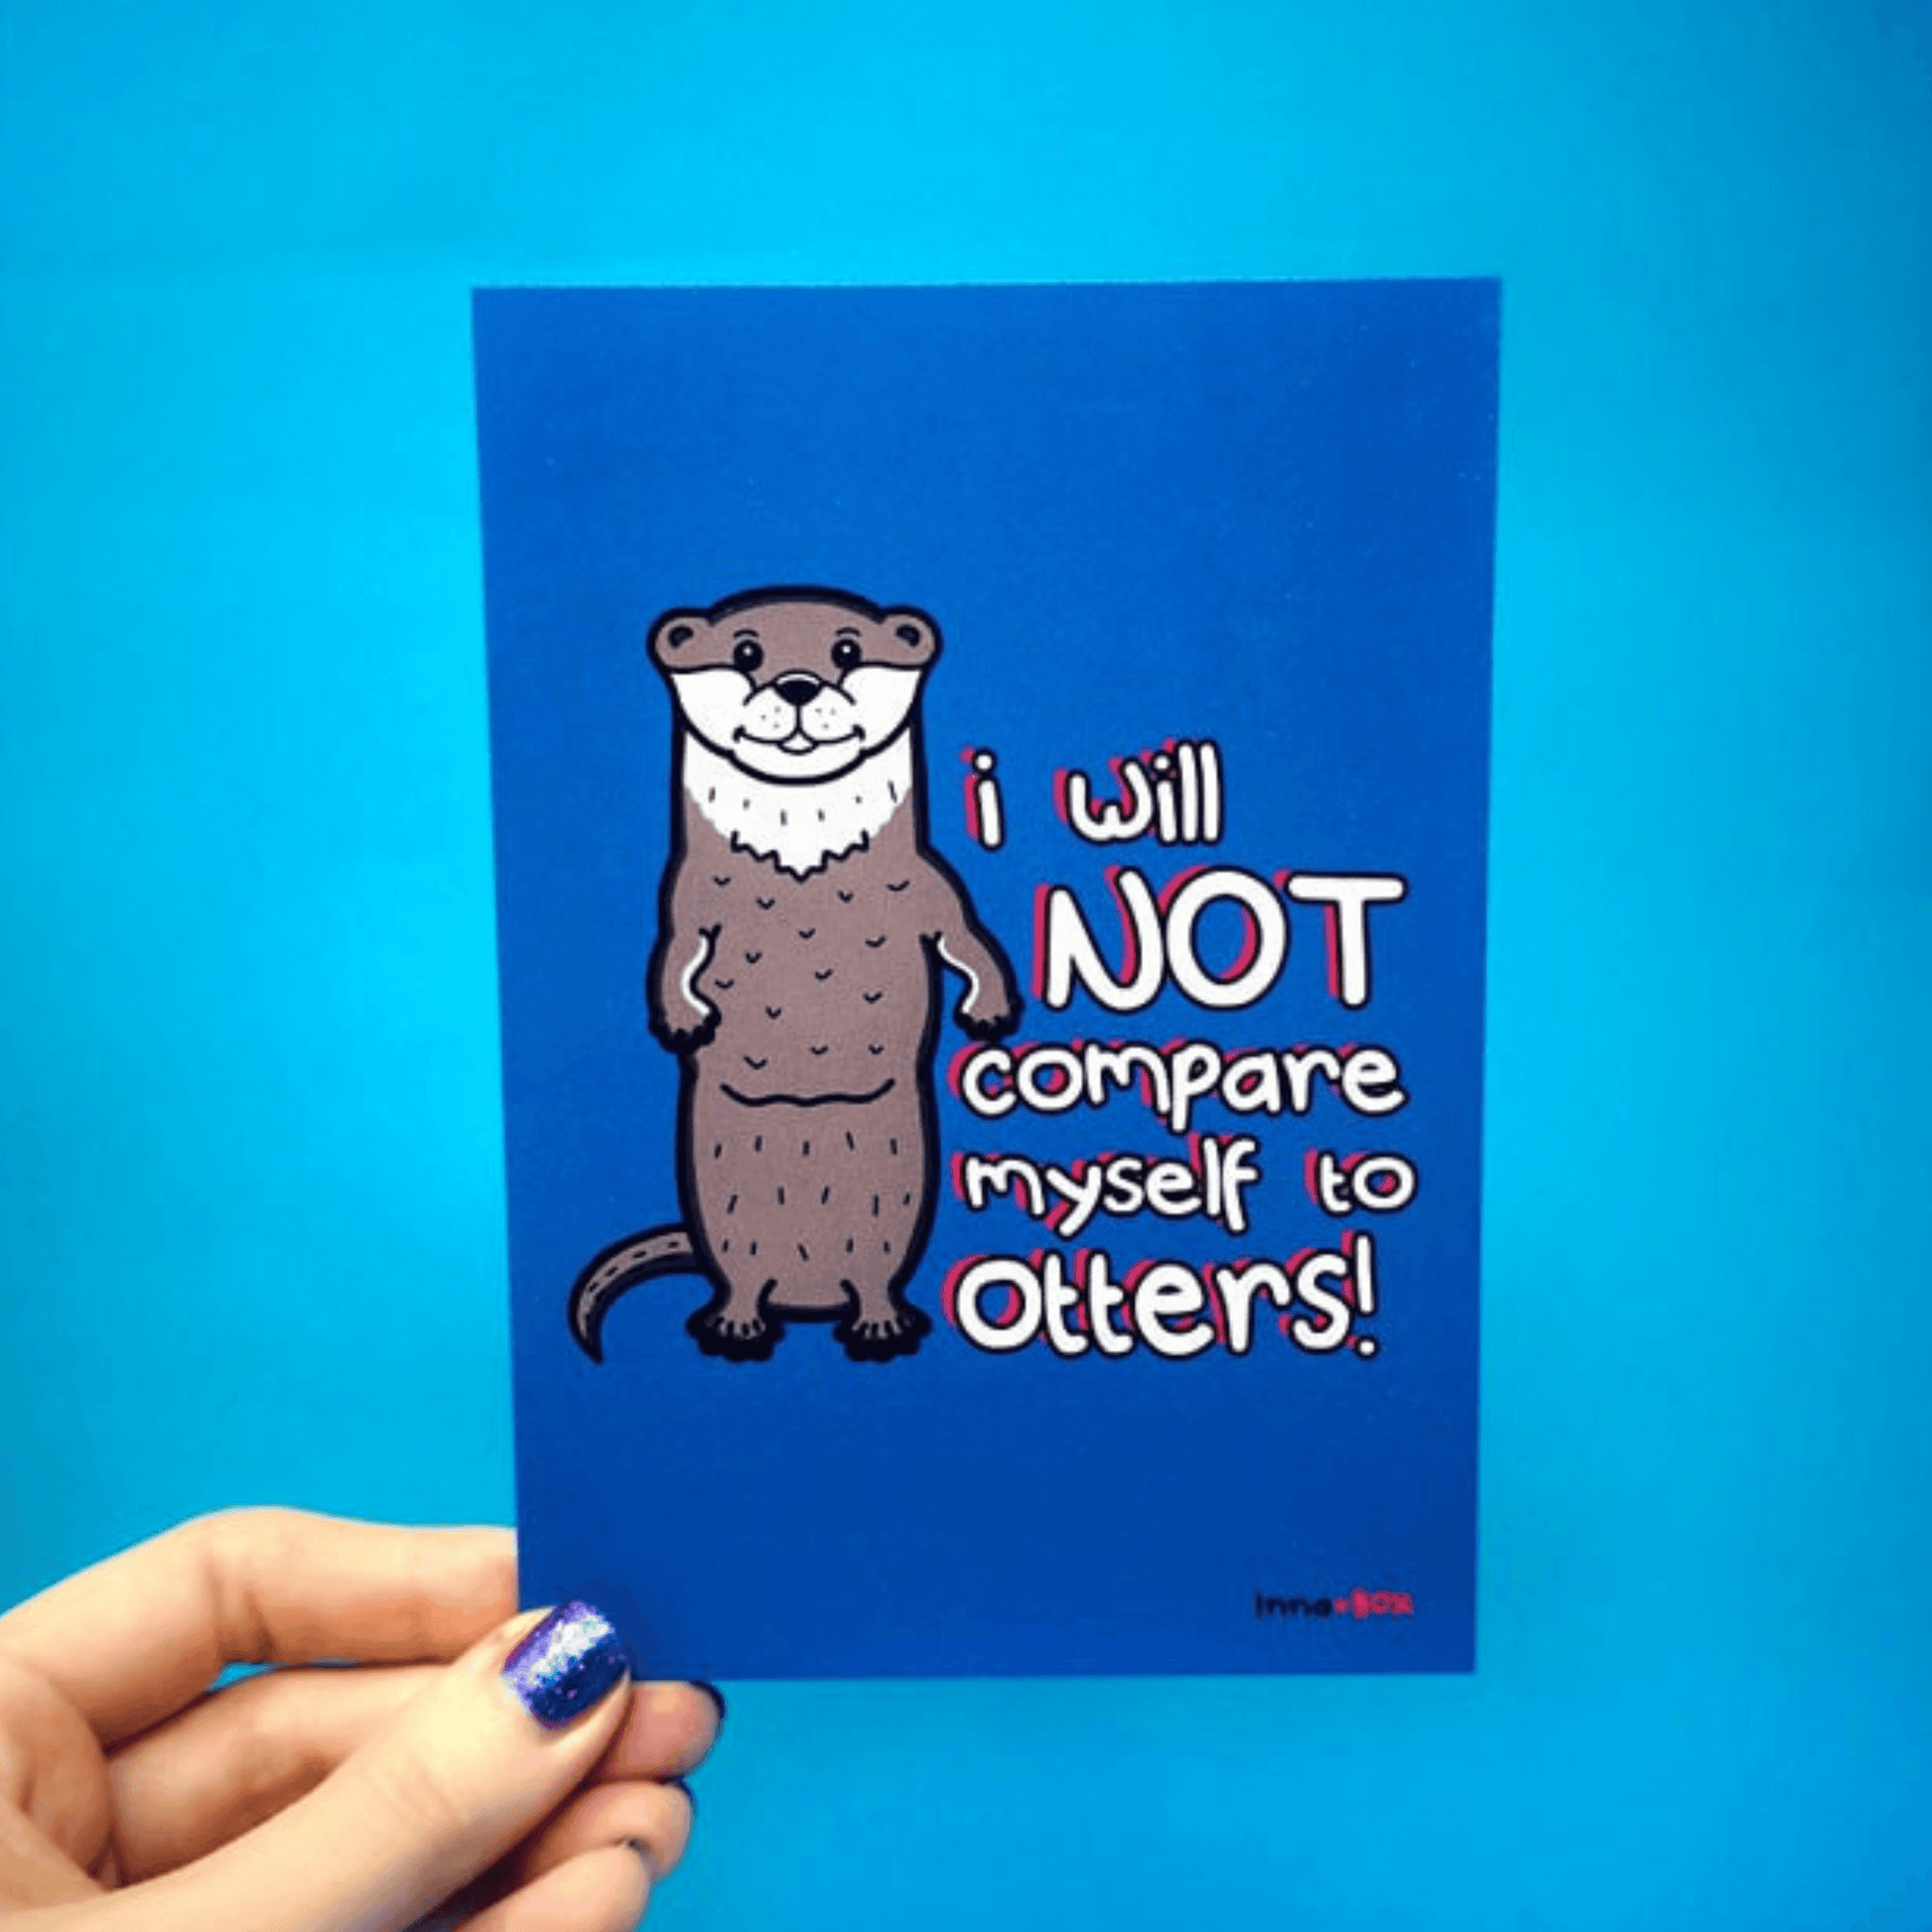 The I Will Not Compare Myself to Others Otters Postcard being held over a blue background. The blue postcard features a standing smiling grey otter with red, black and white text that reads 'I will not compare myself to otters!'. A self care and self love inspired design.